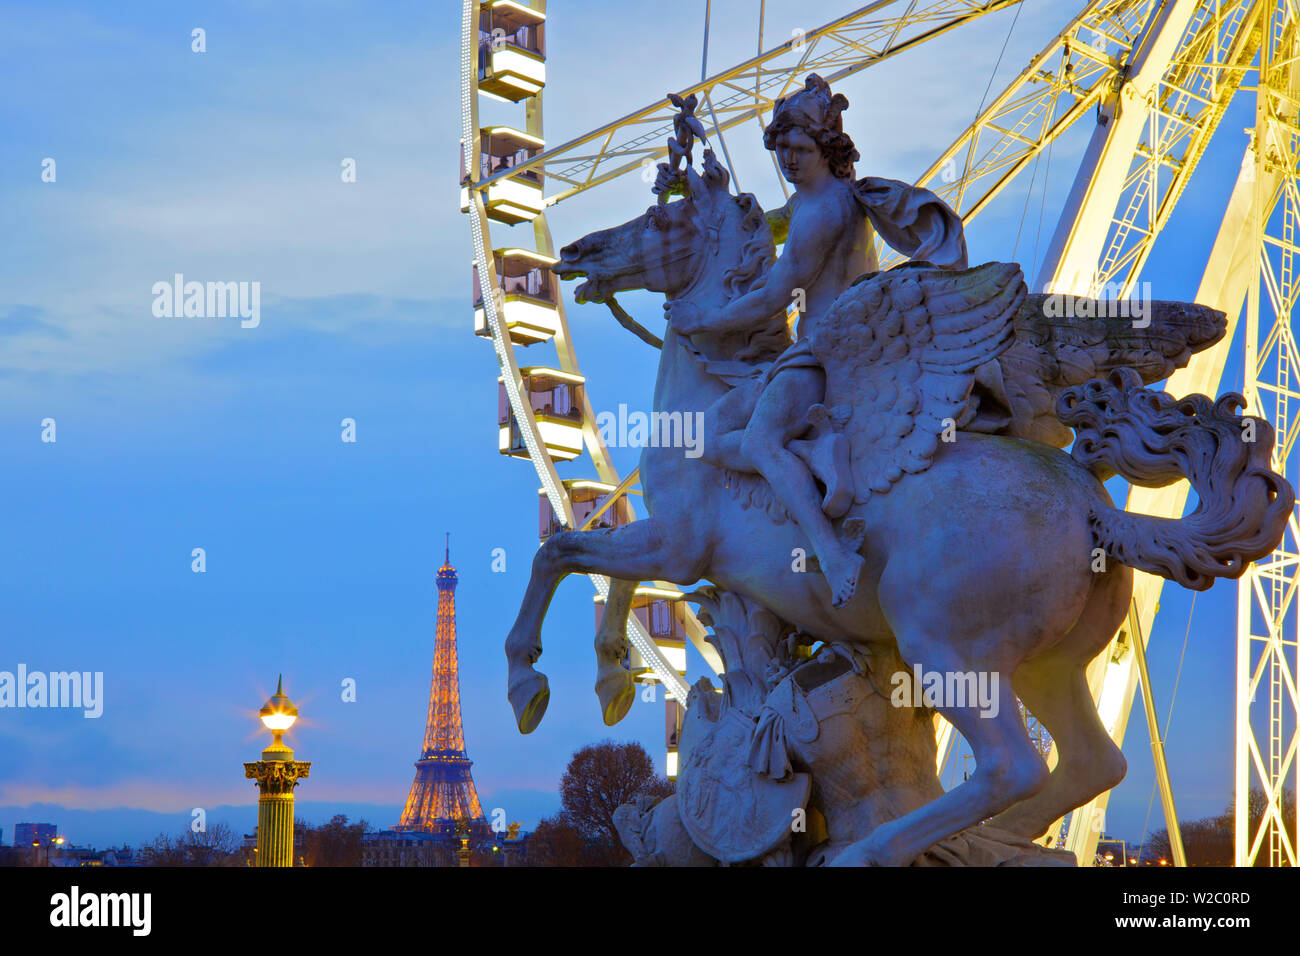 Eiffel Tower From Place De La Concorde With Big Wheel And Statue In Foreground, Paris, France, Western Europe. Stock Photo